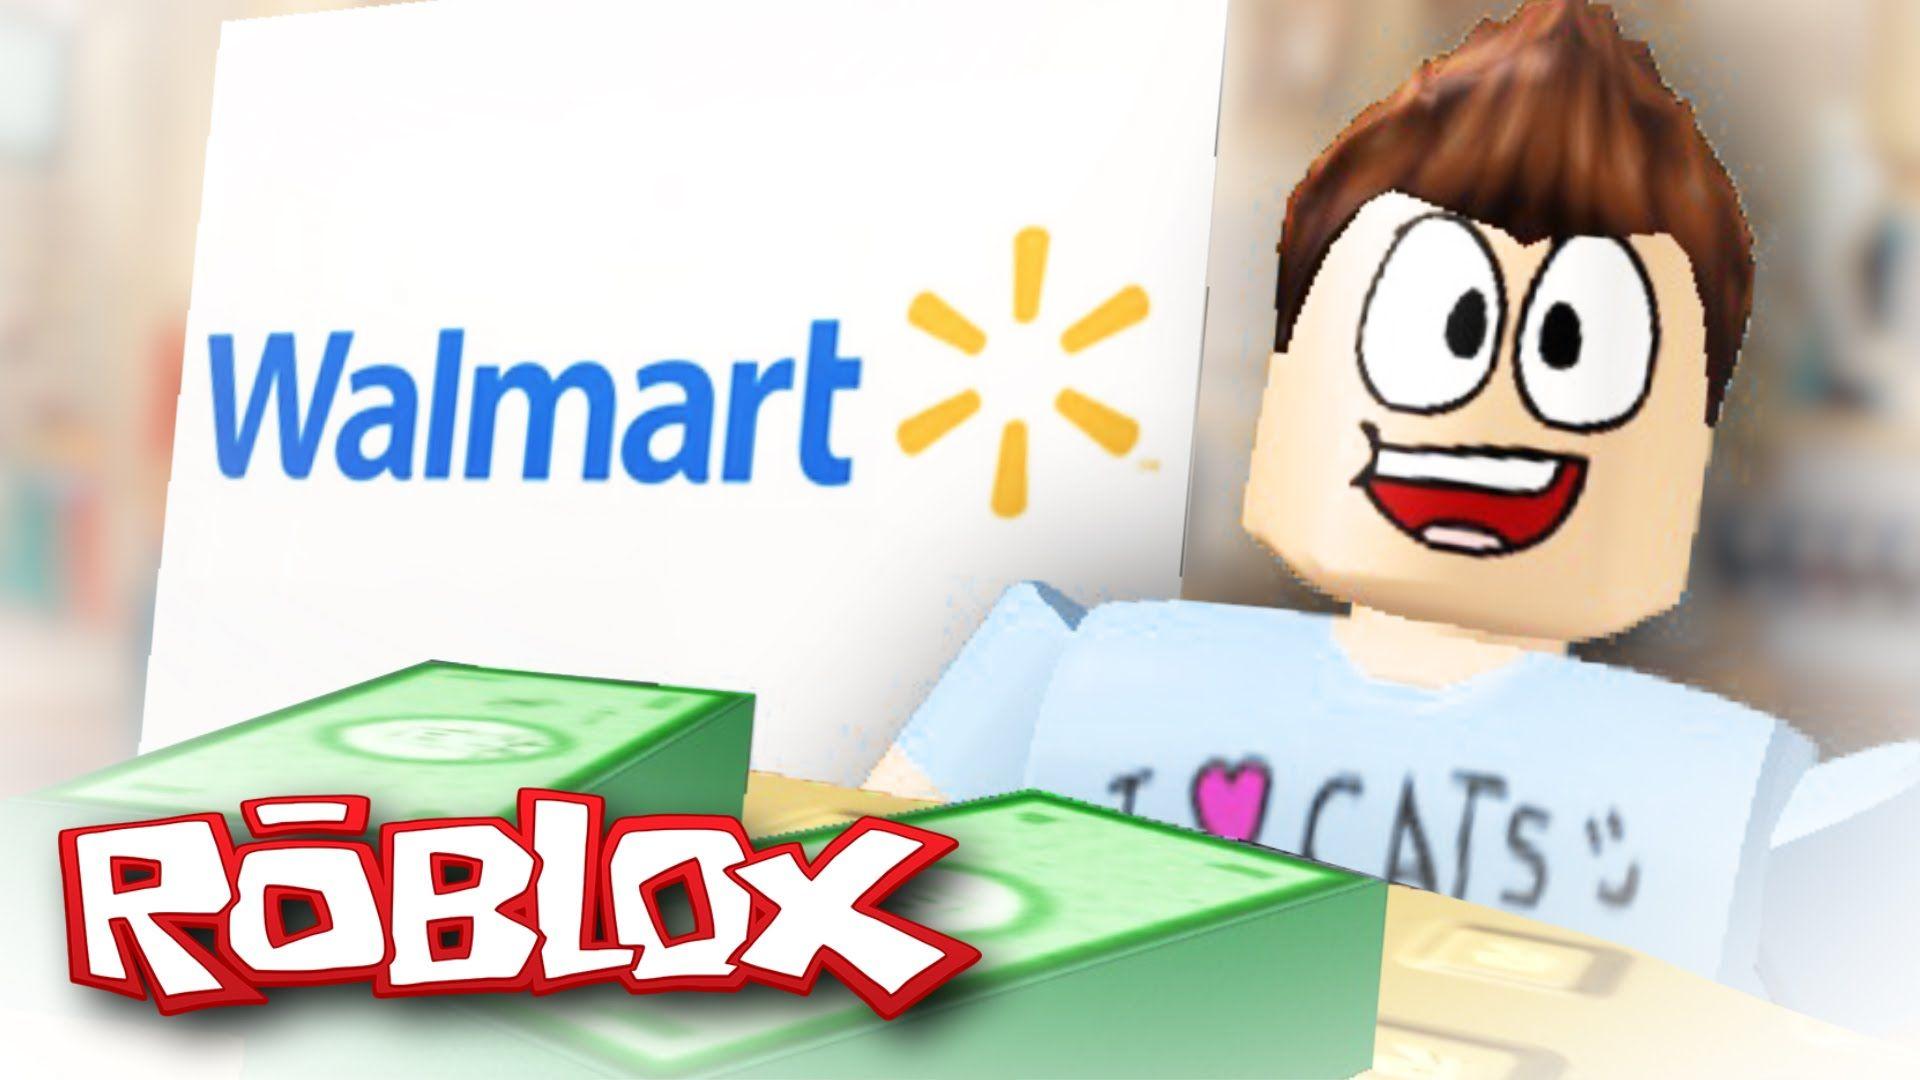 Roblox Youtube Tycoon With Denis